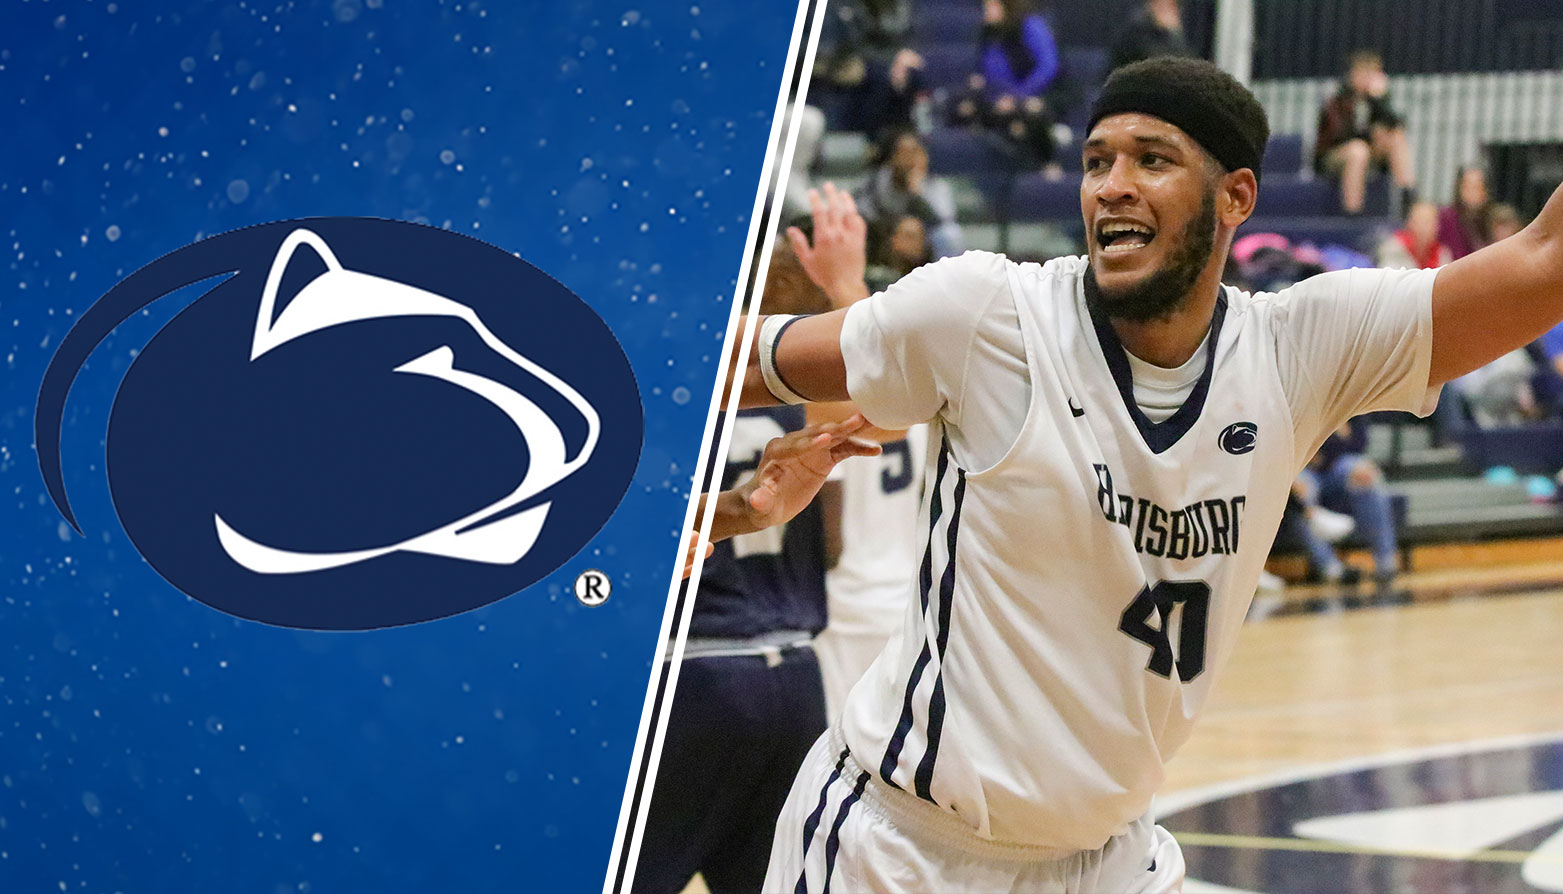 Penn State Harrisburg's Chris Bing Collects CAC Men's Basketball Player of the Week Honors